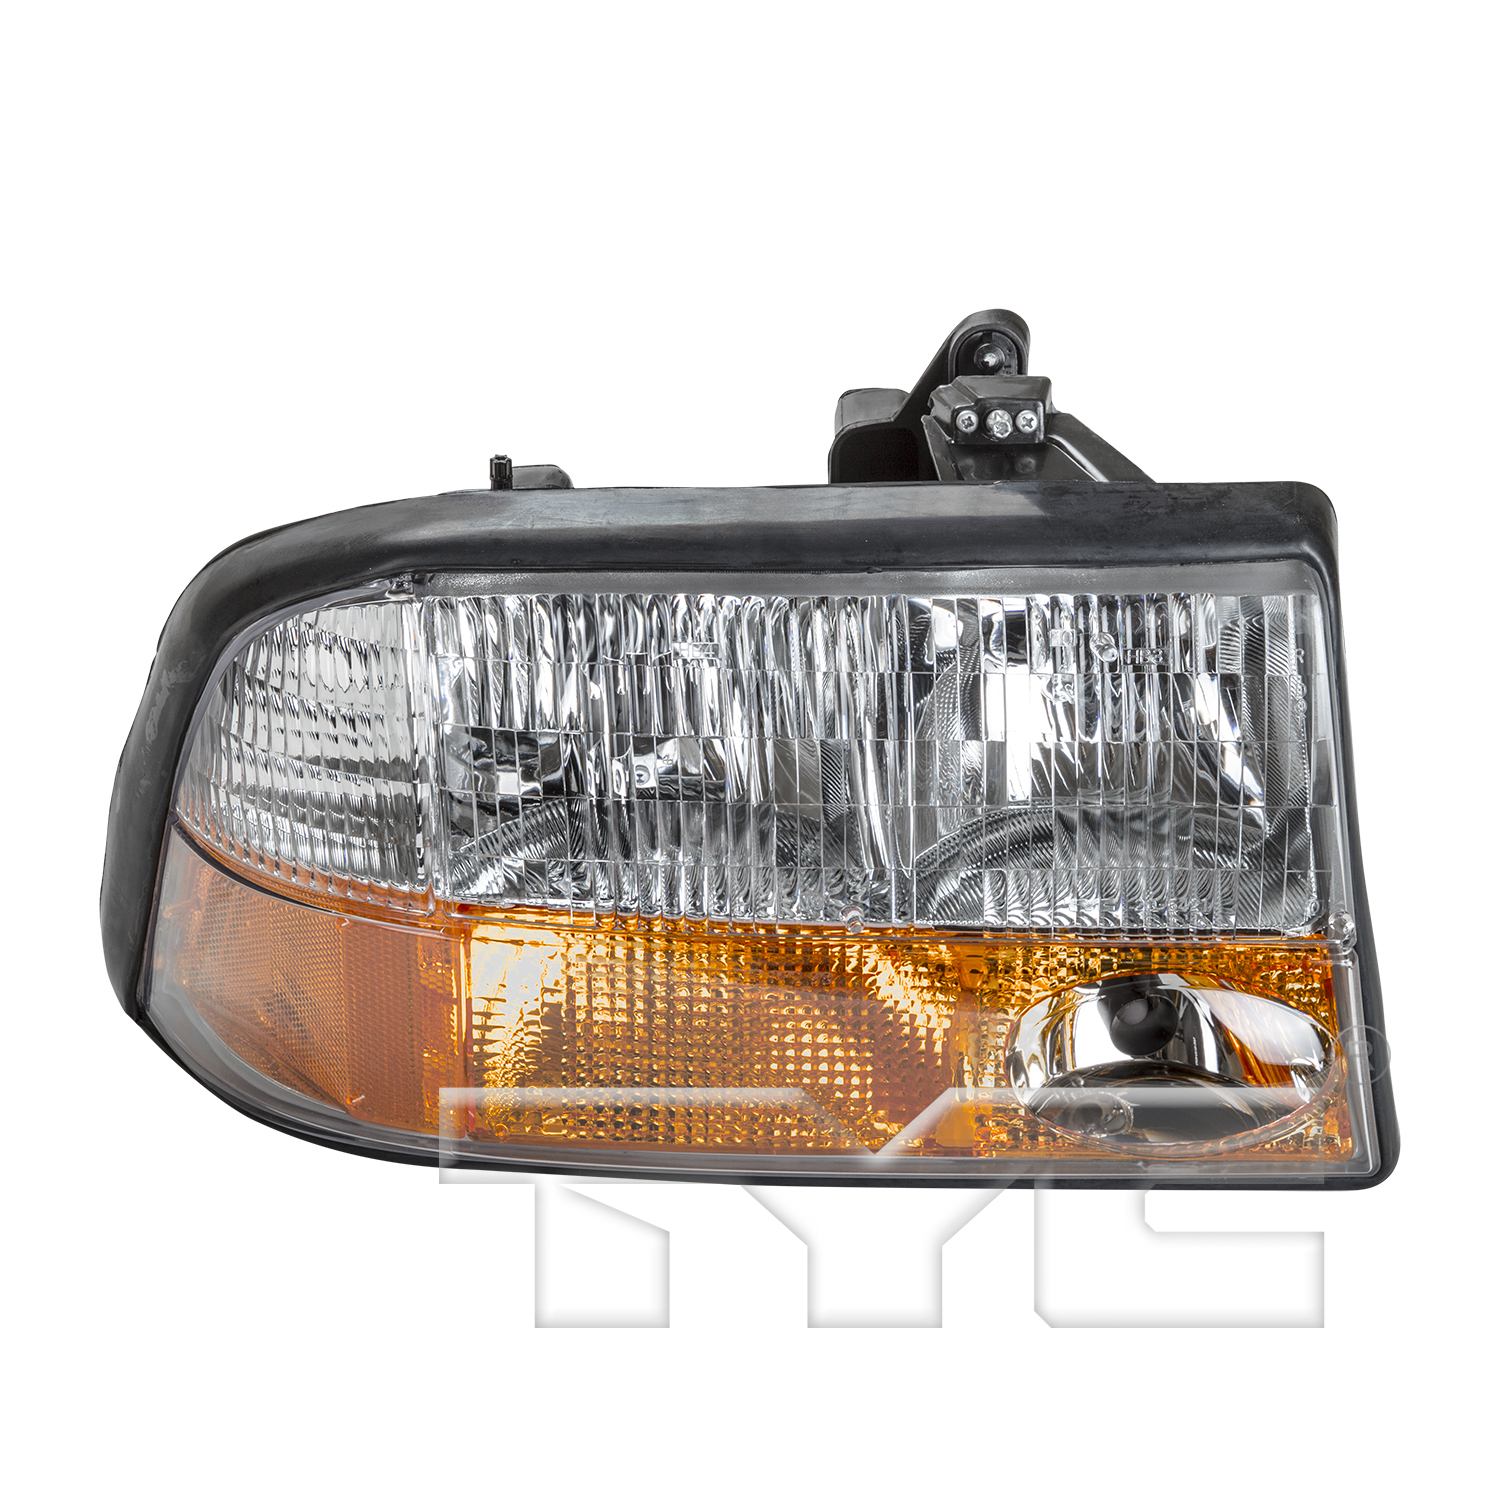 Aftermarket HEADLIGHTS for GMC - SONOMA, SONOMA,98-04,RT Headlamp assy composite